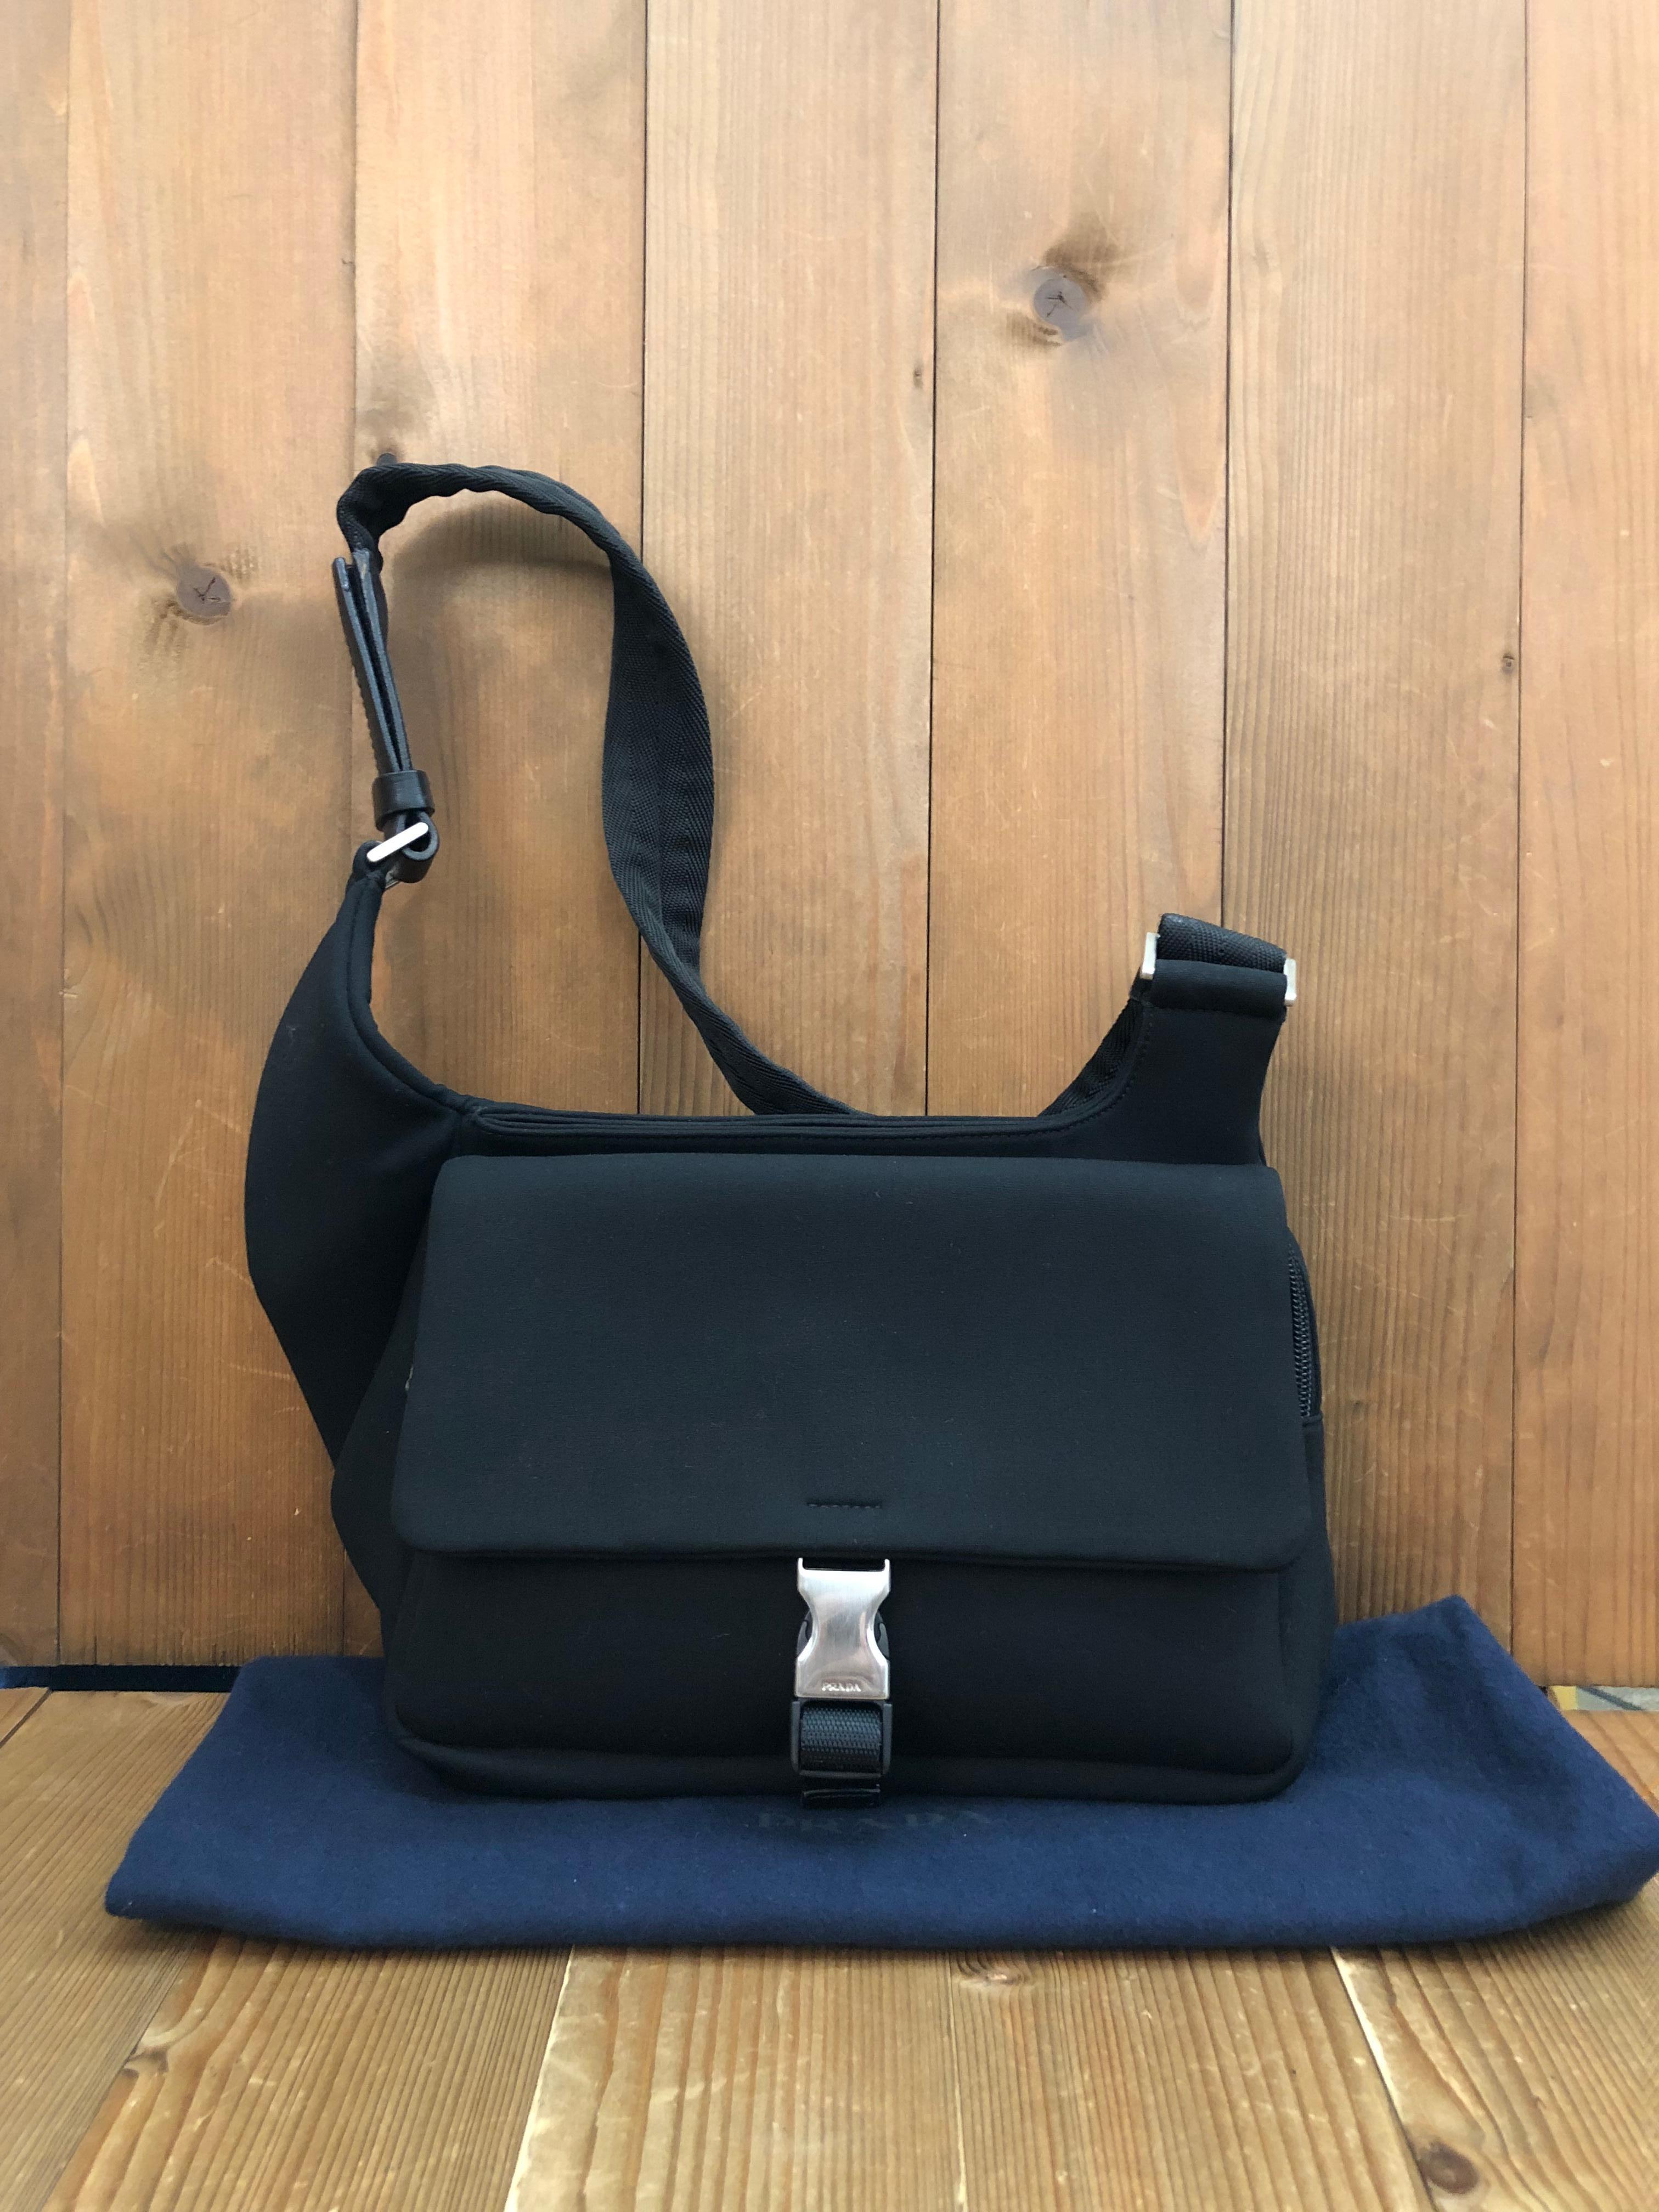 This PRADA crossbody sling bag is crafted of light-weight microfiber fabric in black featuring stainless steel hardware. Front flap buckle closure opens to a zippered pocket with Prada’s jacquard interior. This Prada bag also features back pocket